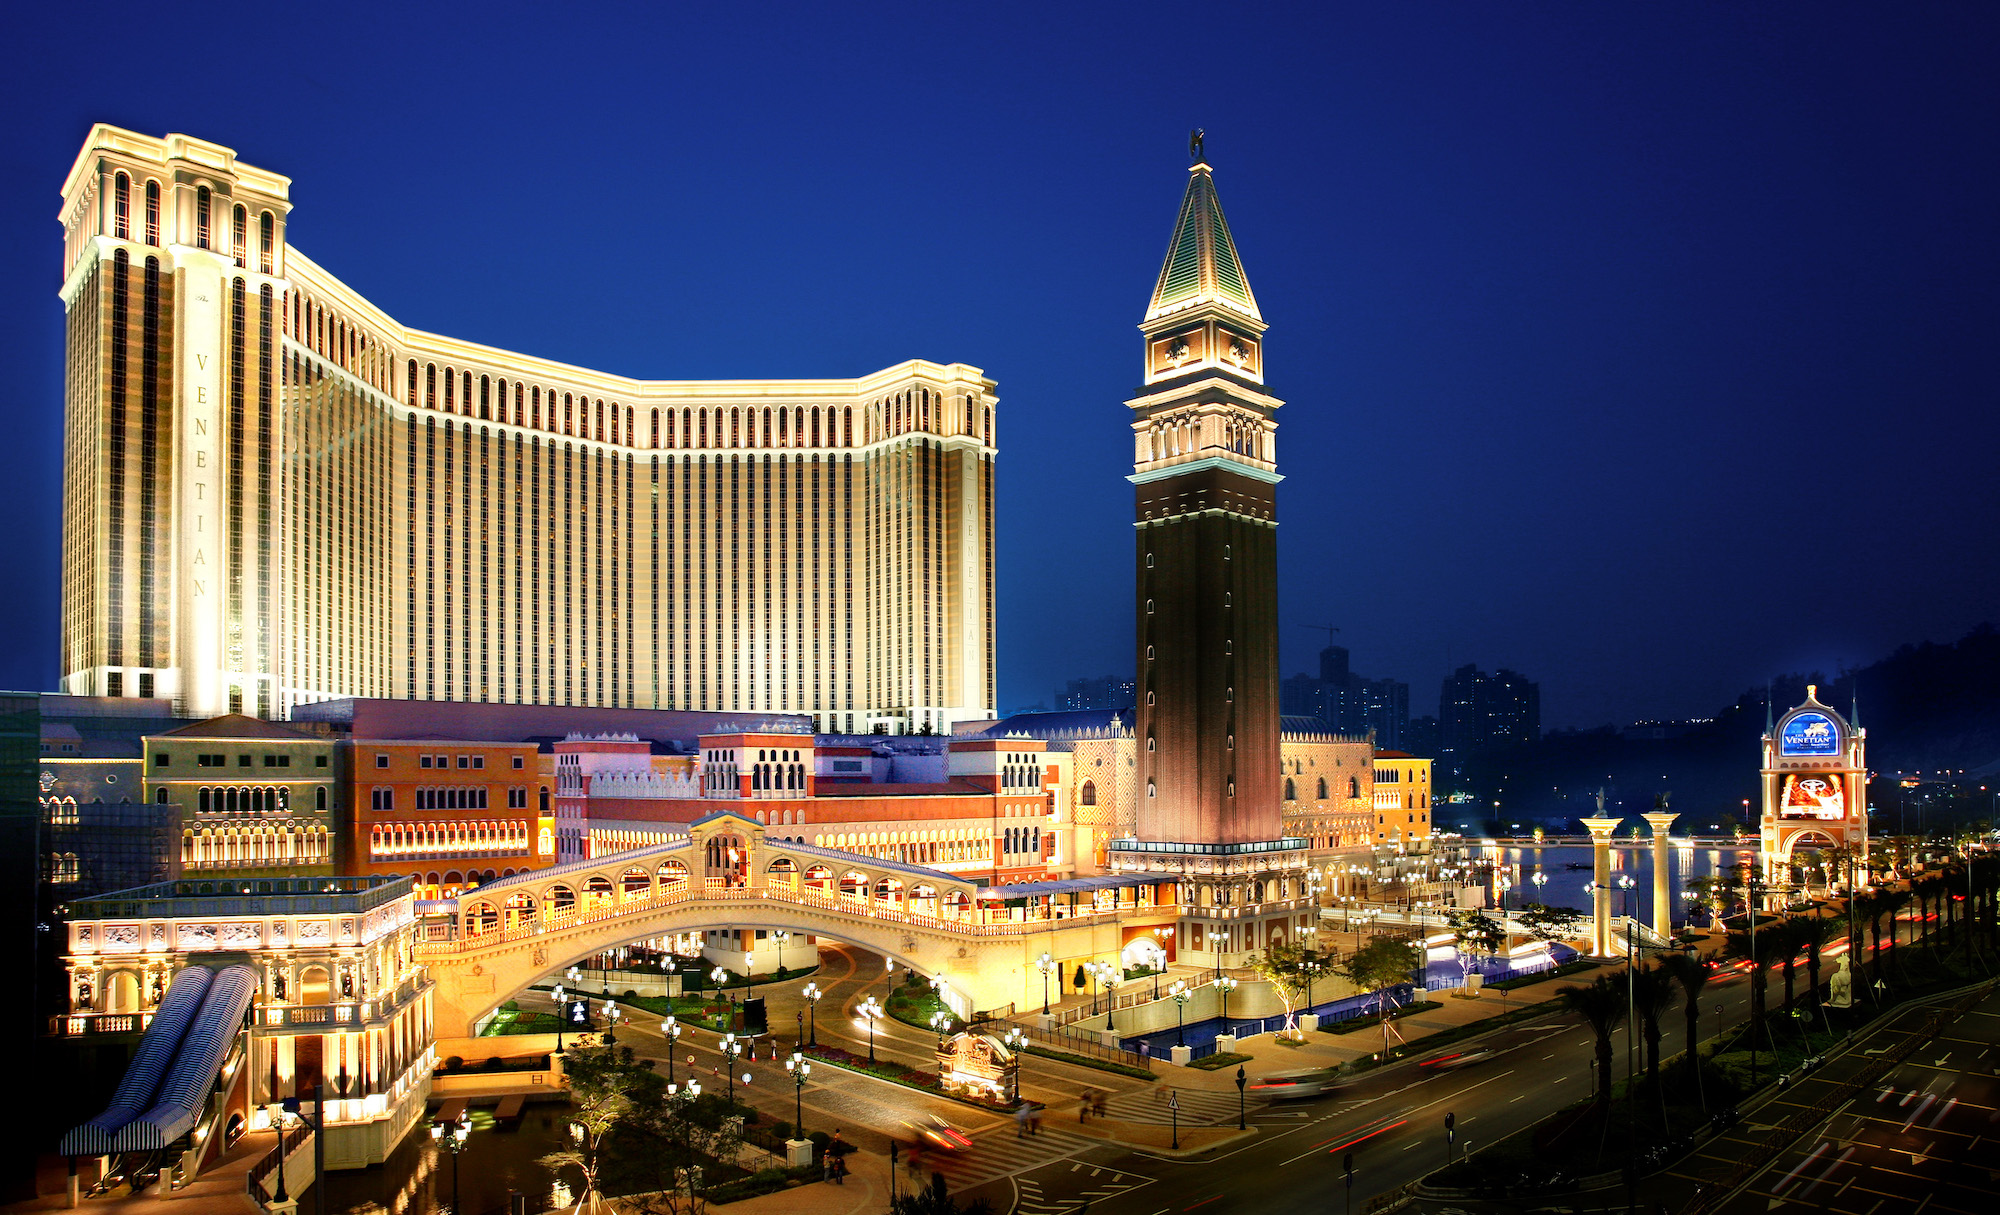 Global Gaming Expo Asia and the Asian IR Expo come to the Venetian